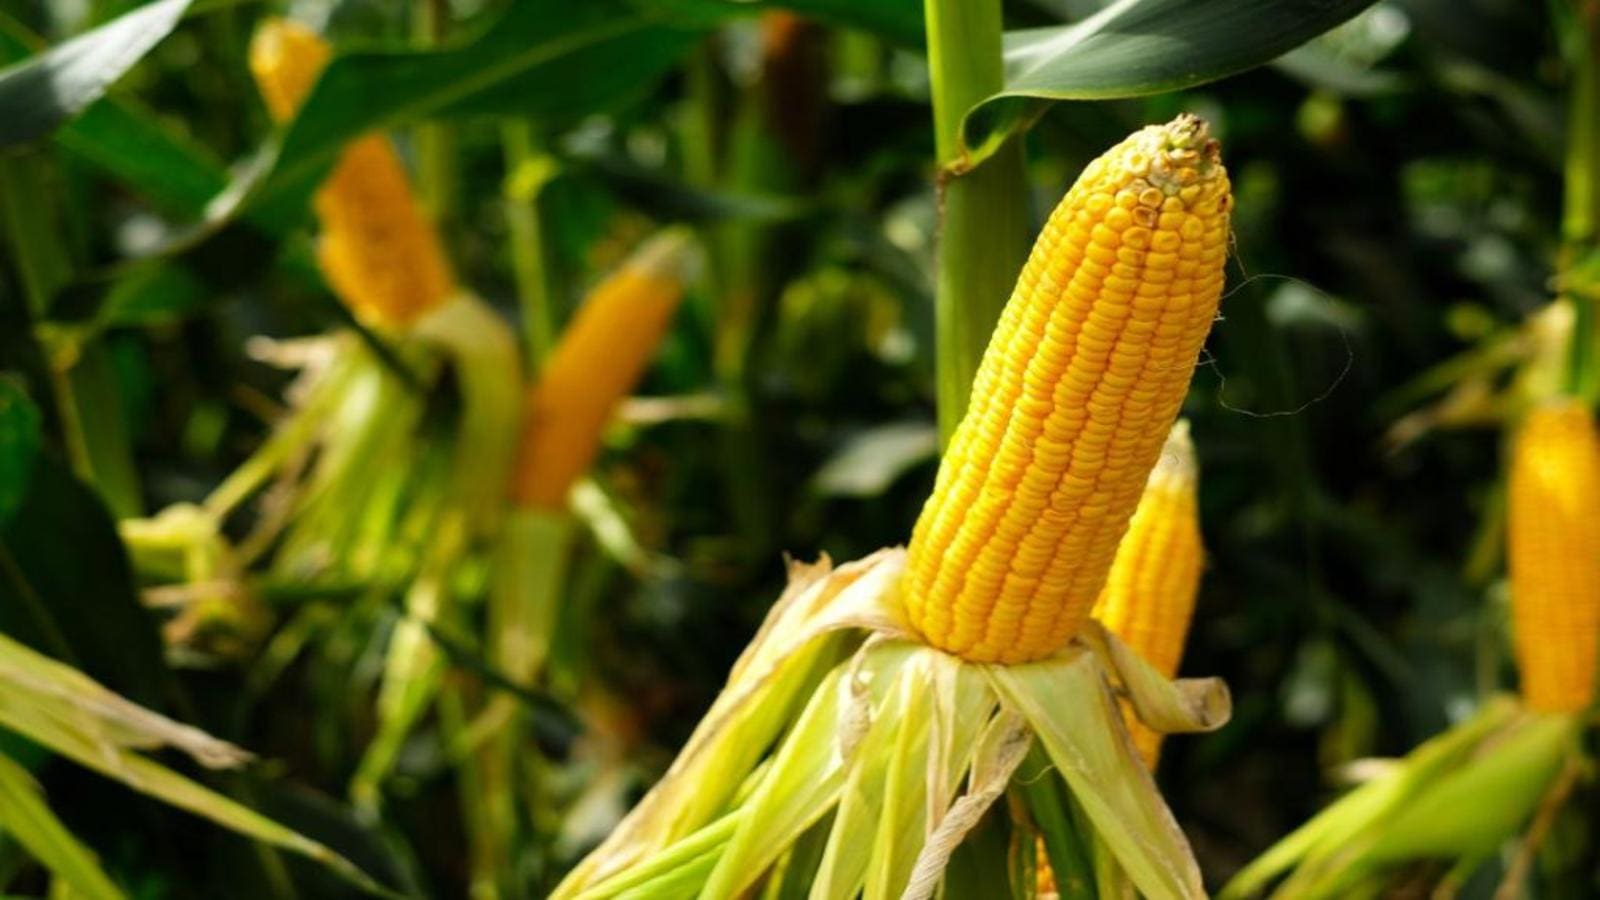 Kenya’s corn production set to recover triggering 12.5% decline in import volumes